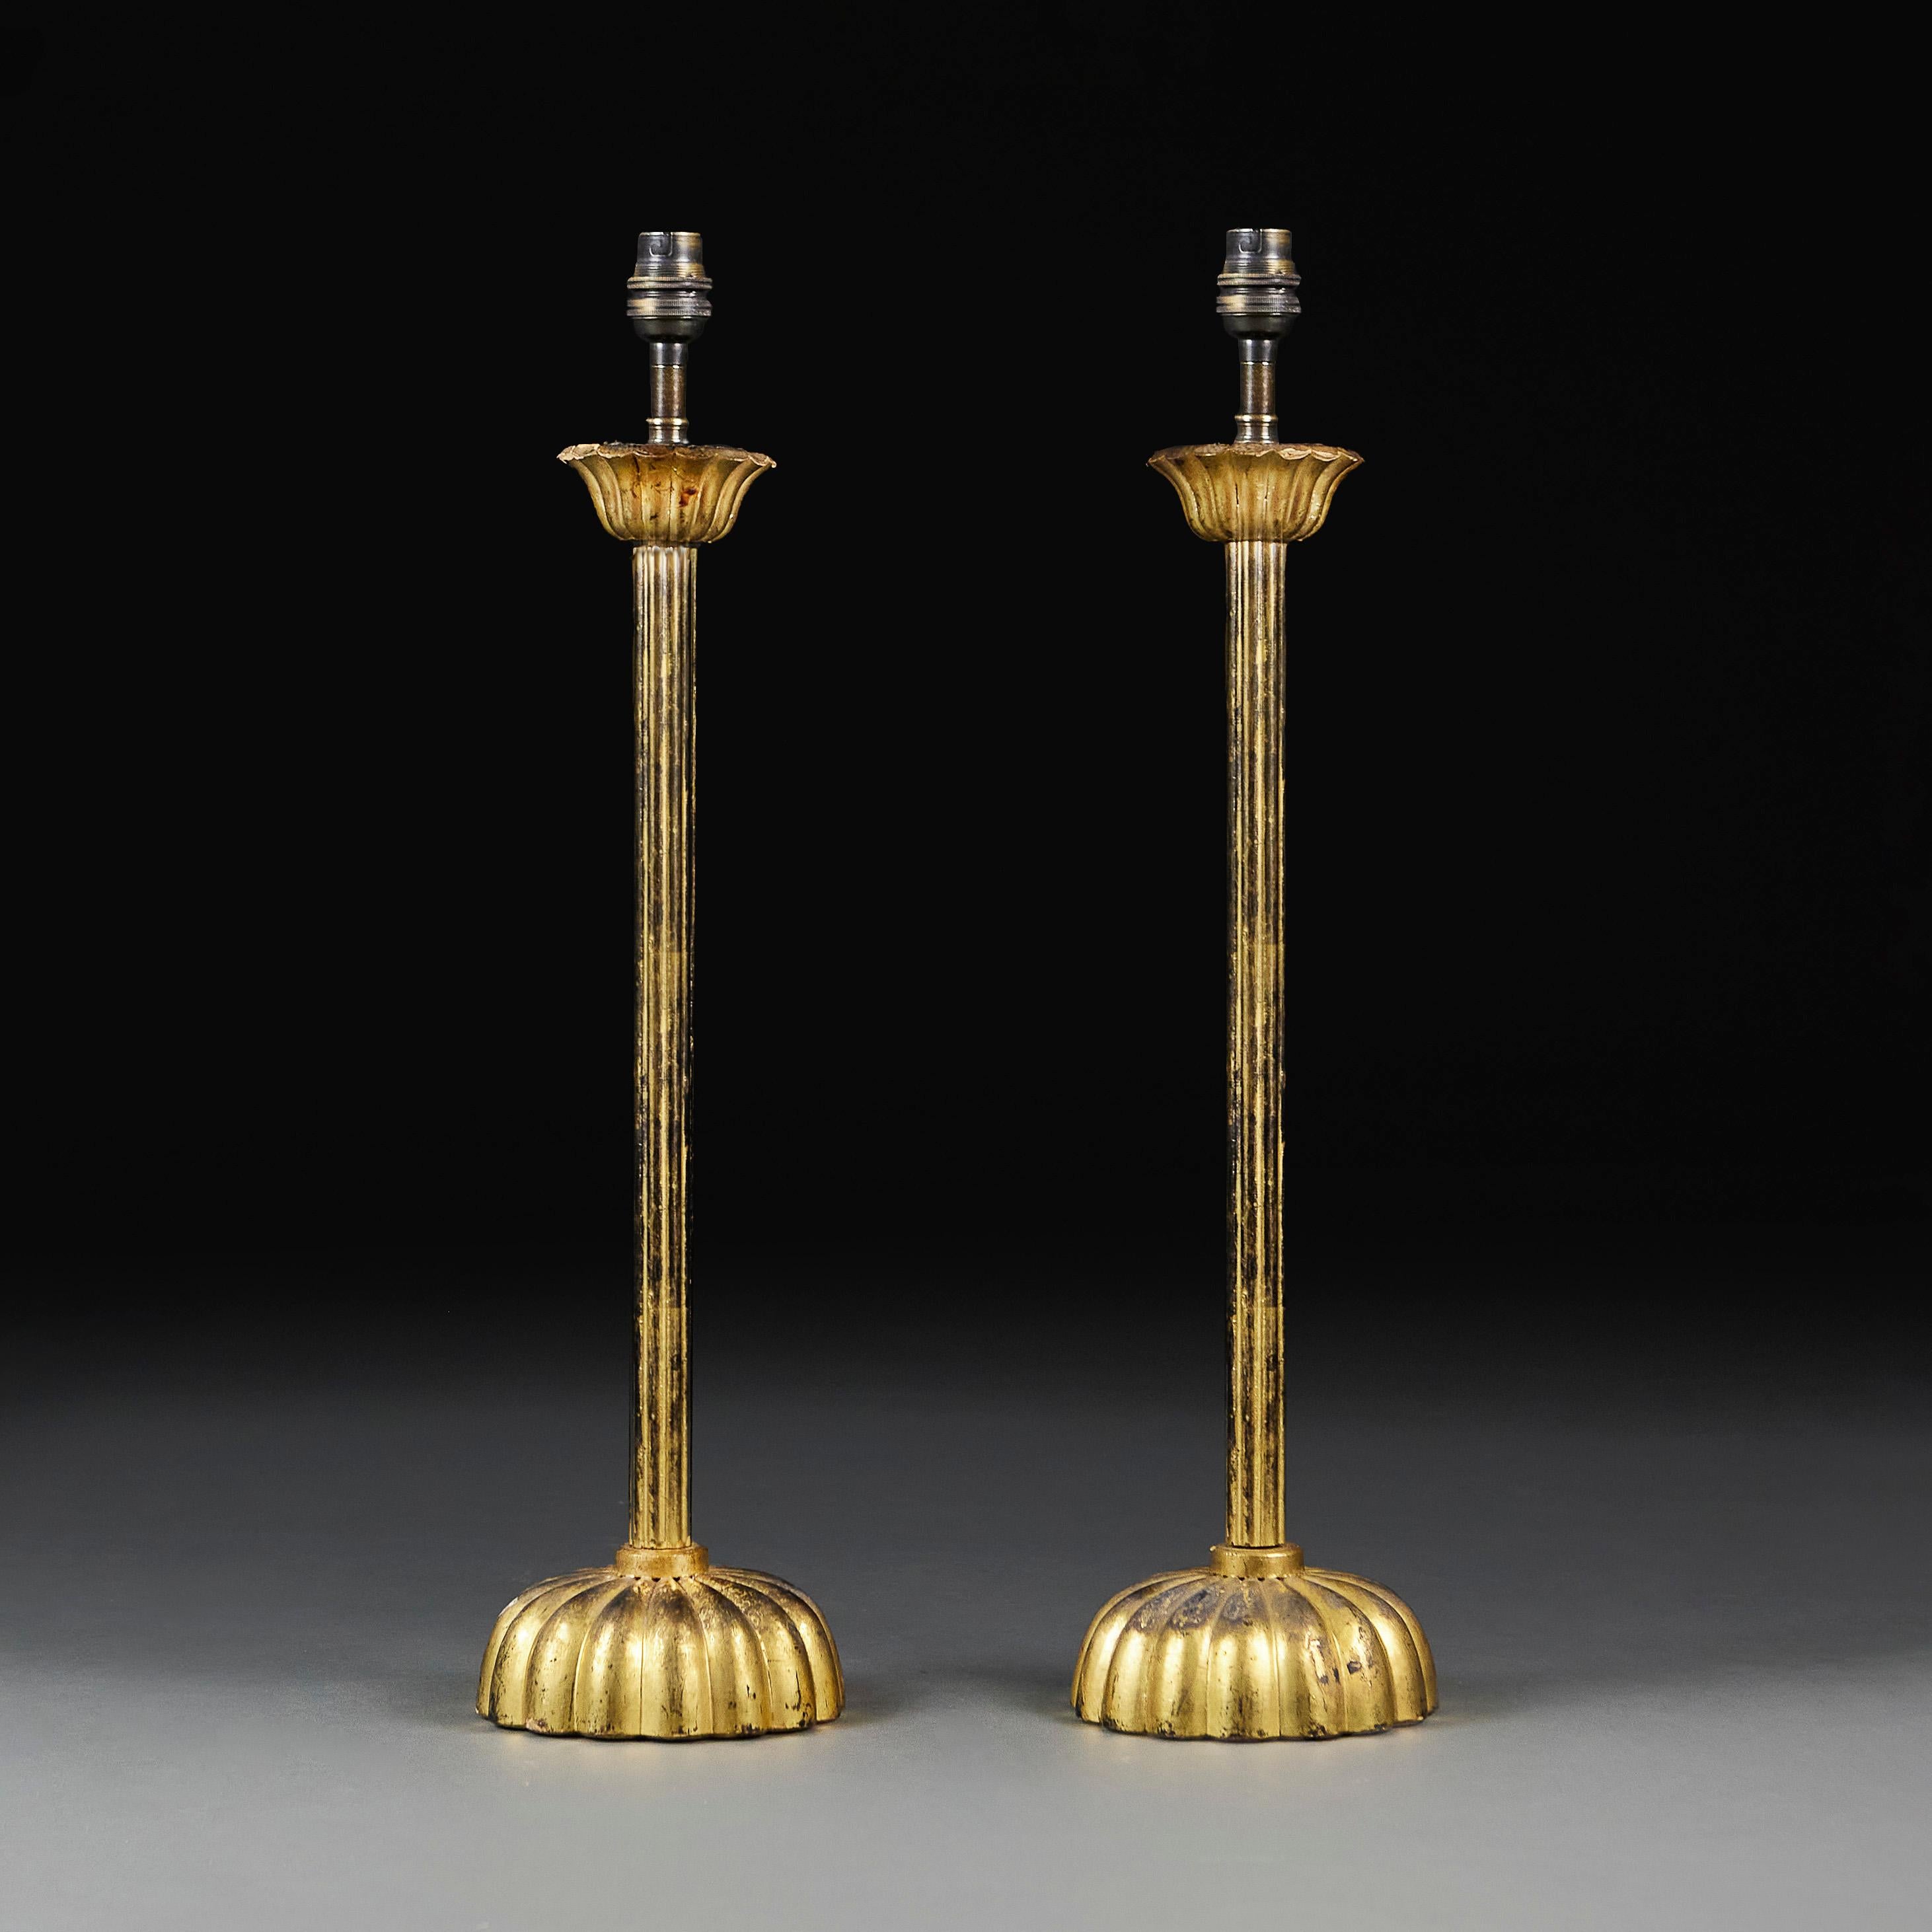 Wood A Large Pair Of 19th Century Japanese Candlestick Lamps